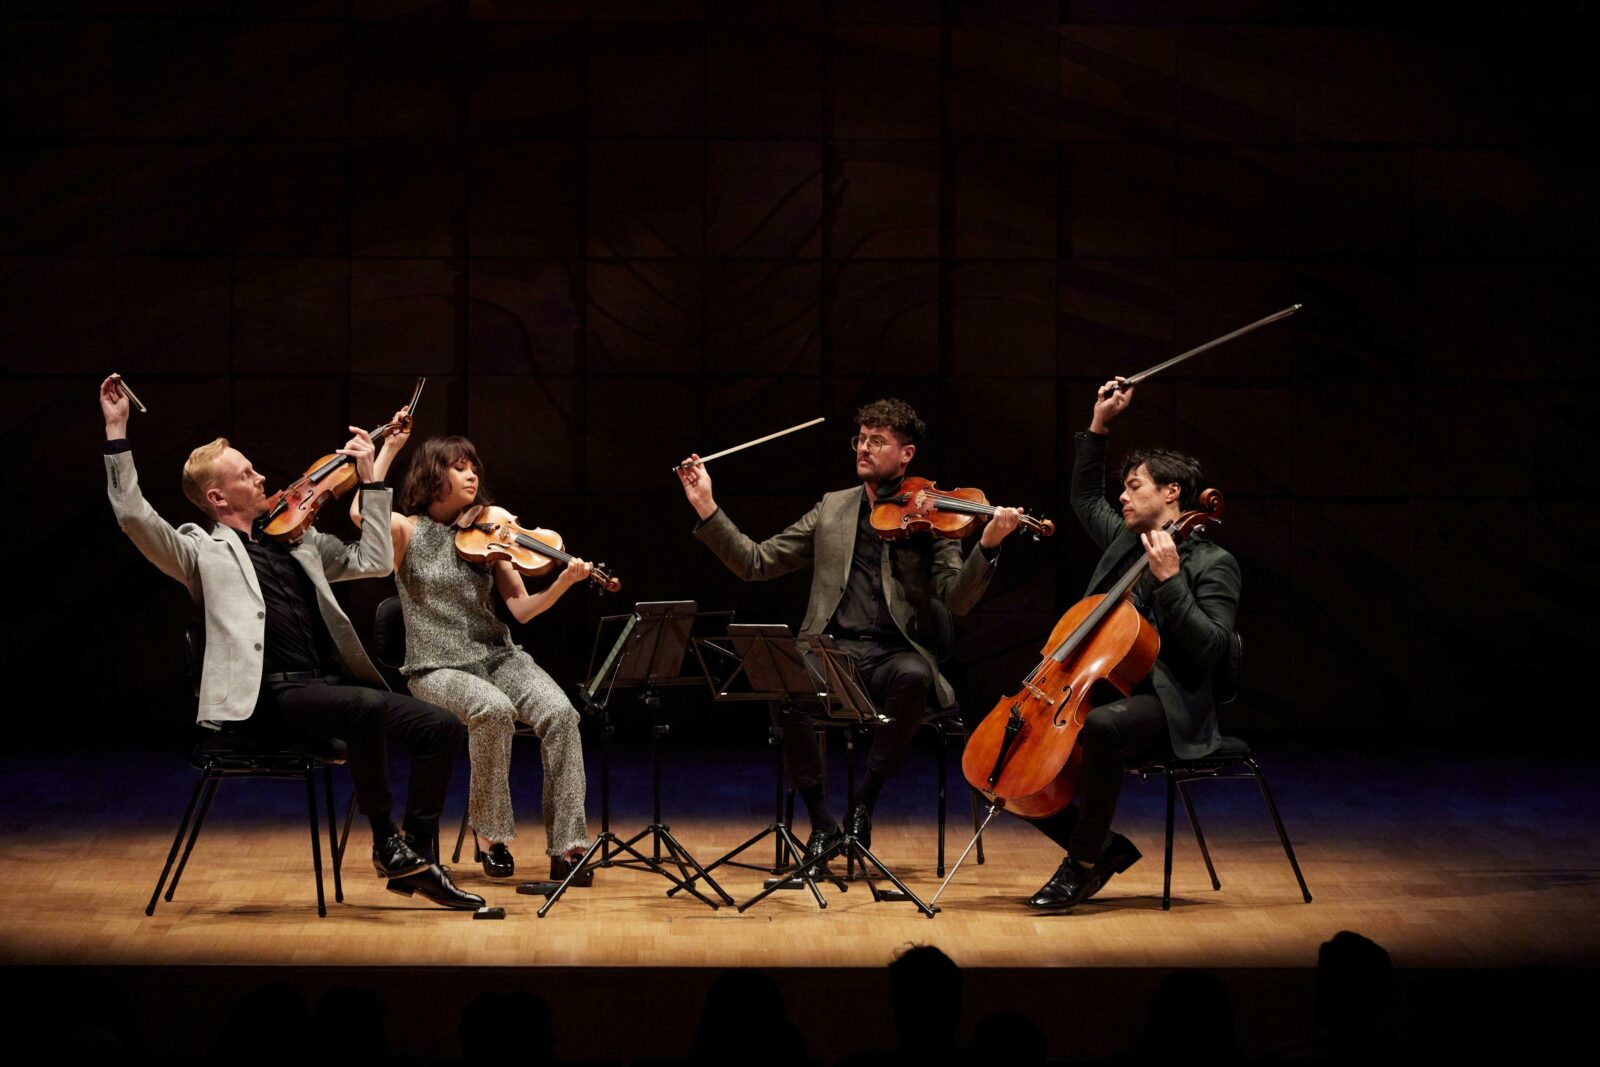 A string quartet in a spotlight on a drkened stage